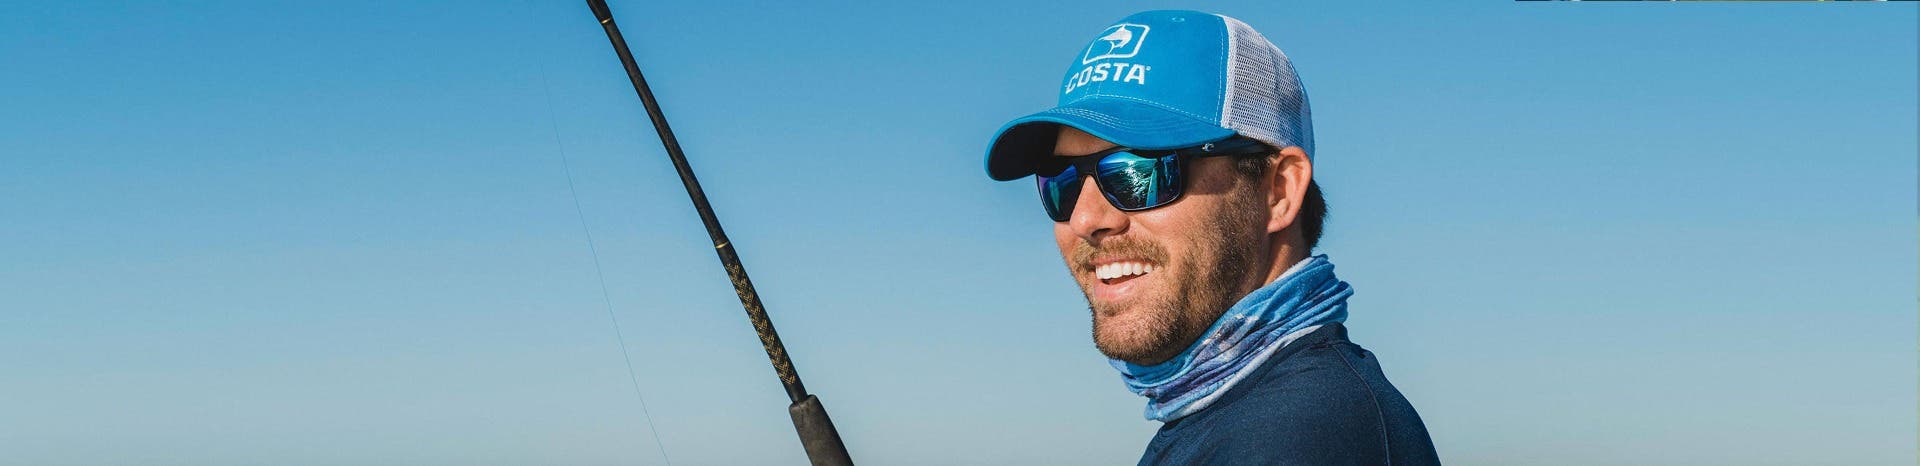 An angler smiles as he looks into the sun in blue polarized fishing sunglasses, a blue neck gaiter, and blue long-sleeved t-shirt with his fishing rod in view.